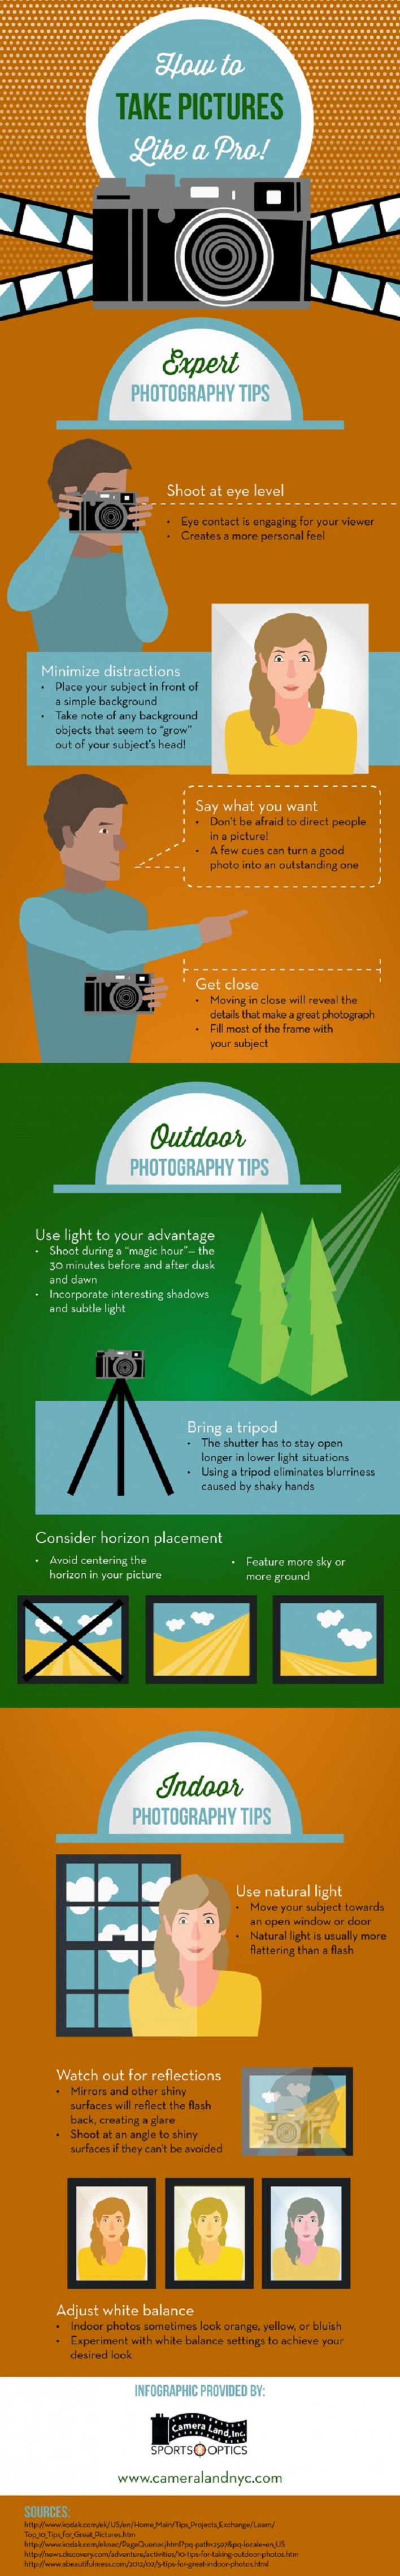 take pictures like a pro infographic